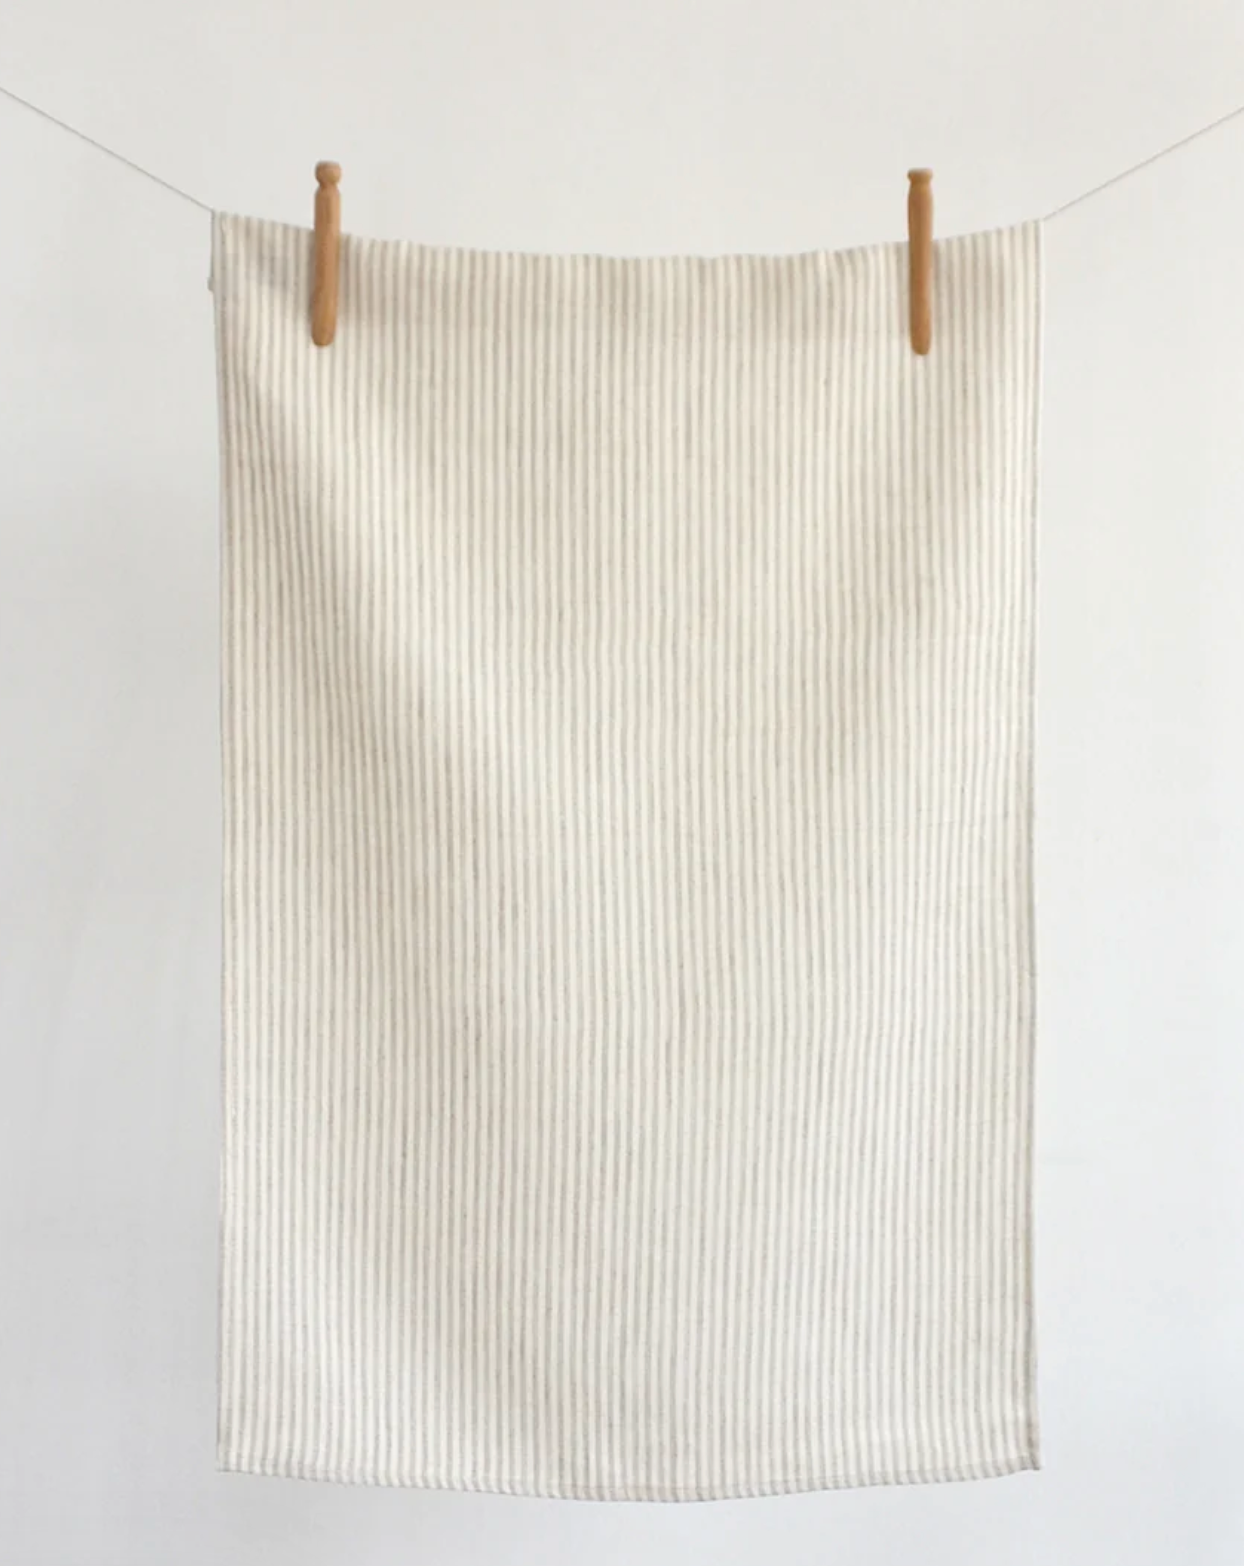 Lily Thin Striped Natural & Ivory Tea Towel